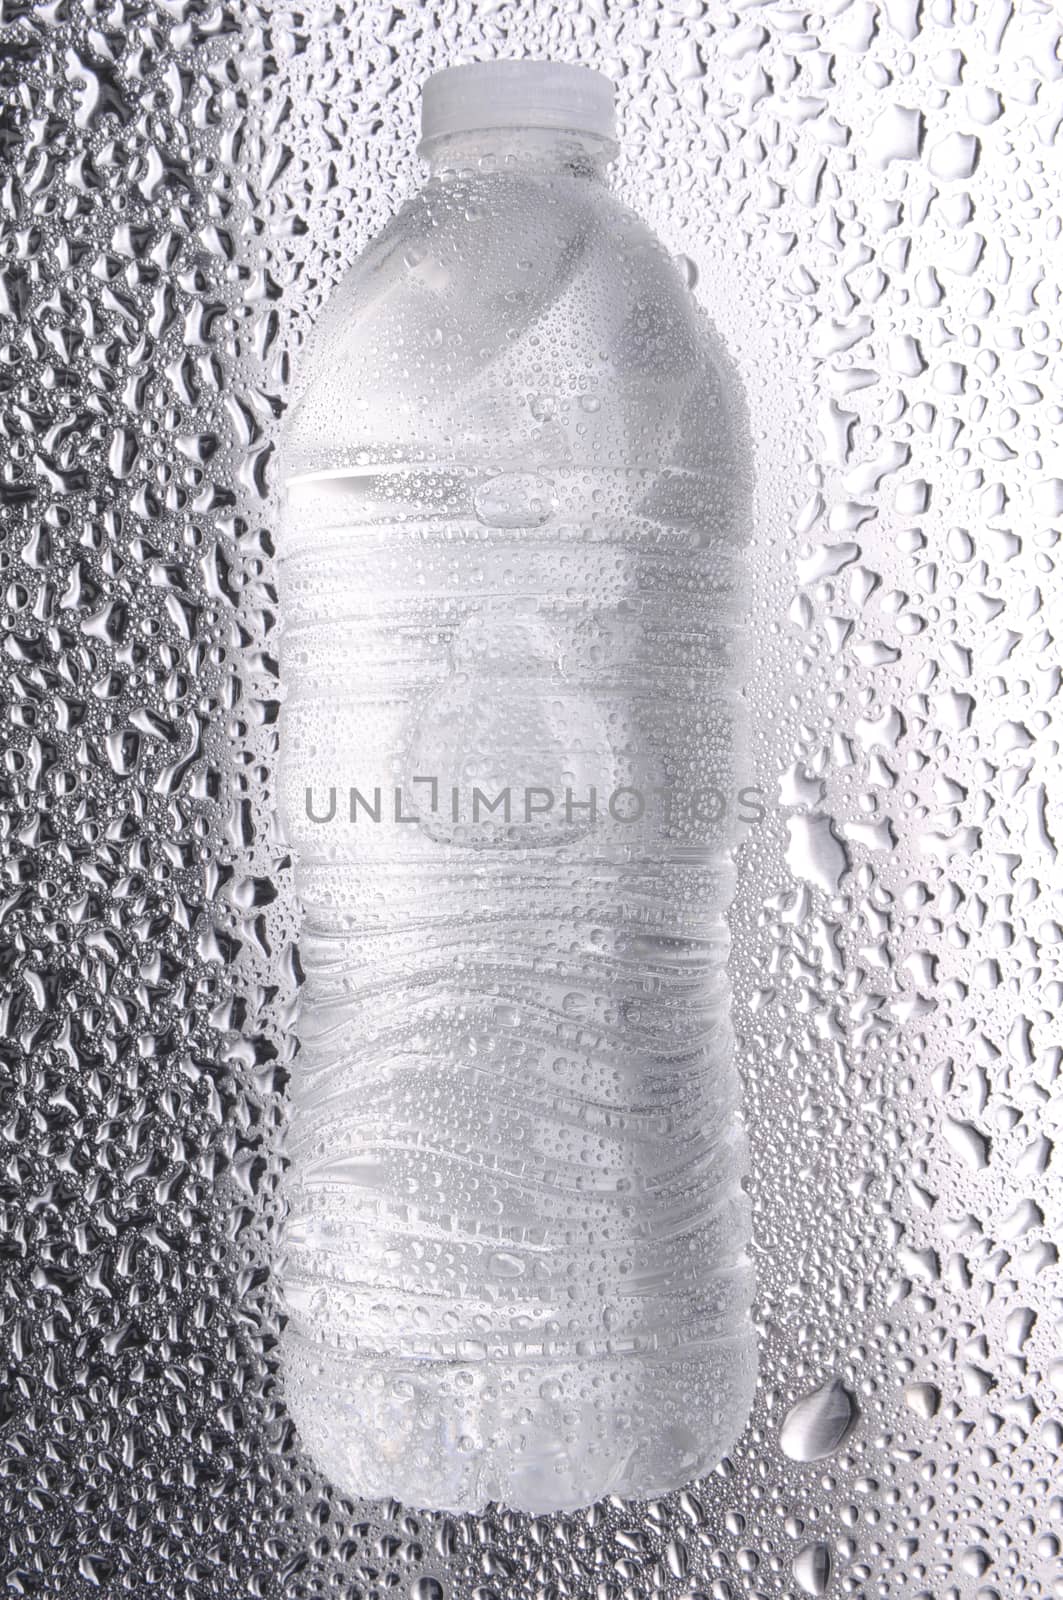 Water bottle laying on its side on a metal surface covered in water drops.